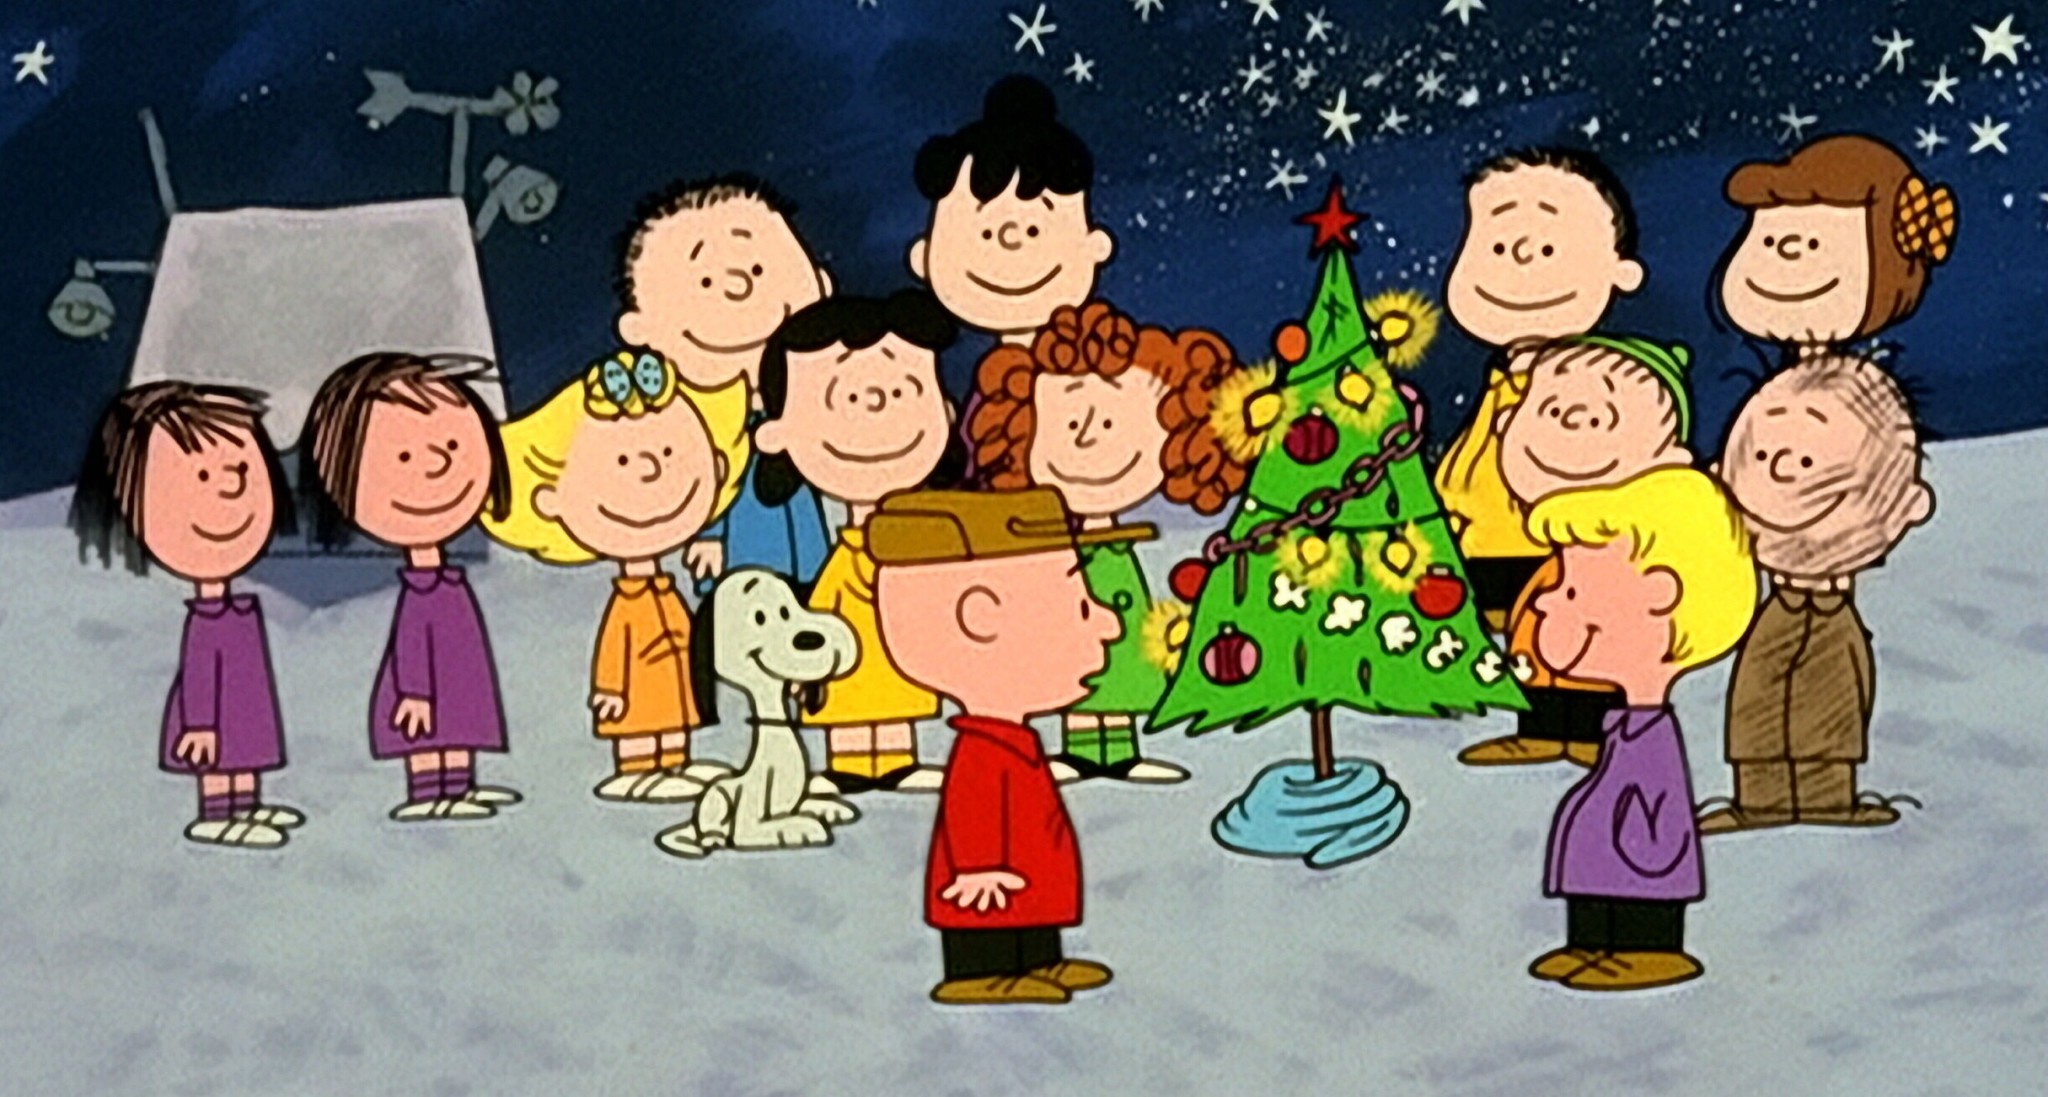 Charlie Brown Holiday Specials will Air on PBS and PBS Kids, Alongside Streaming on Apple TV+